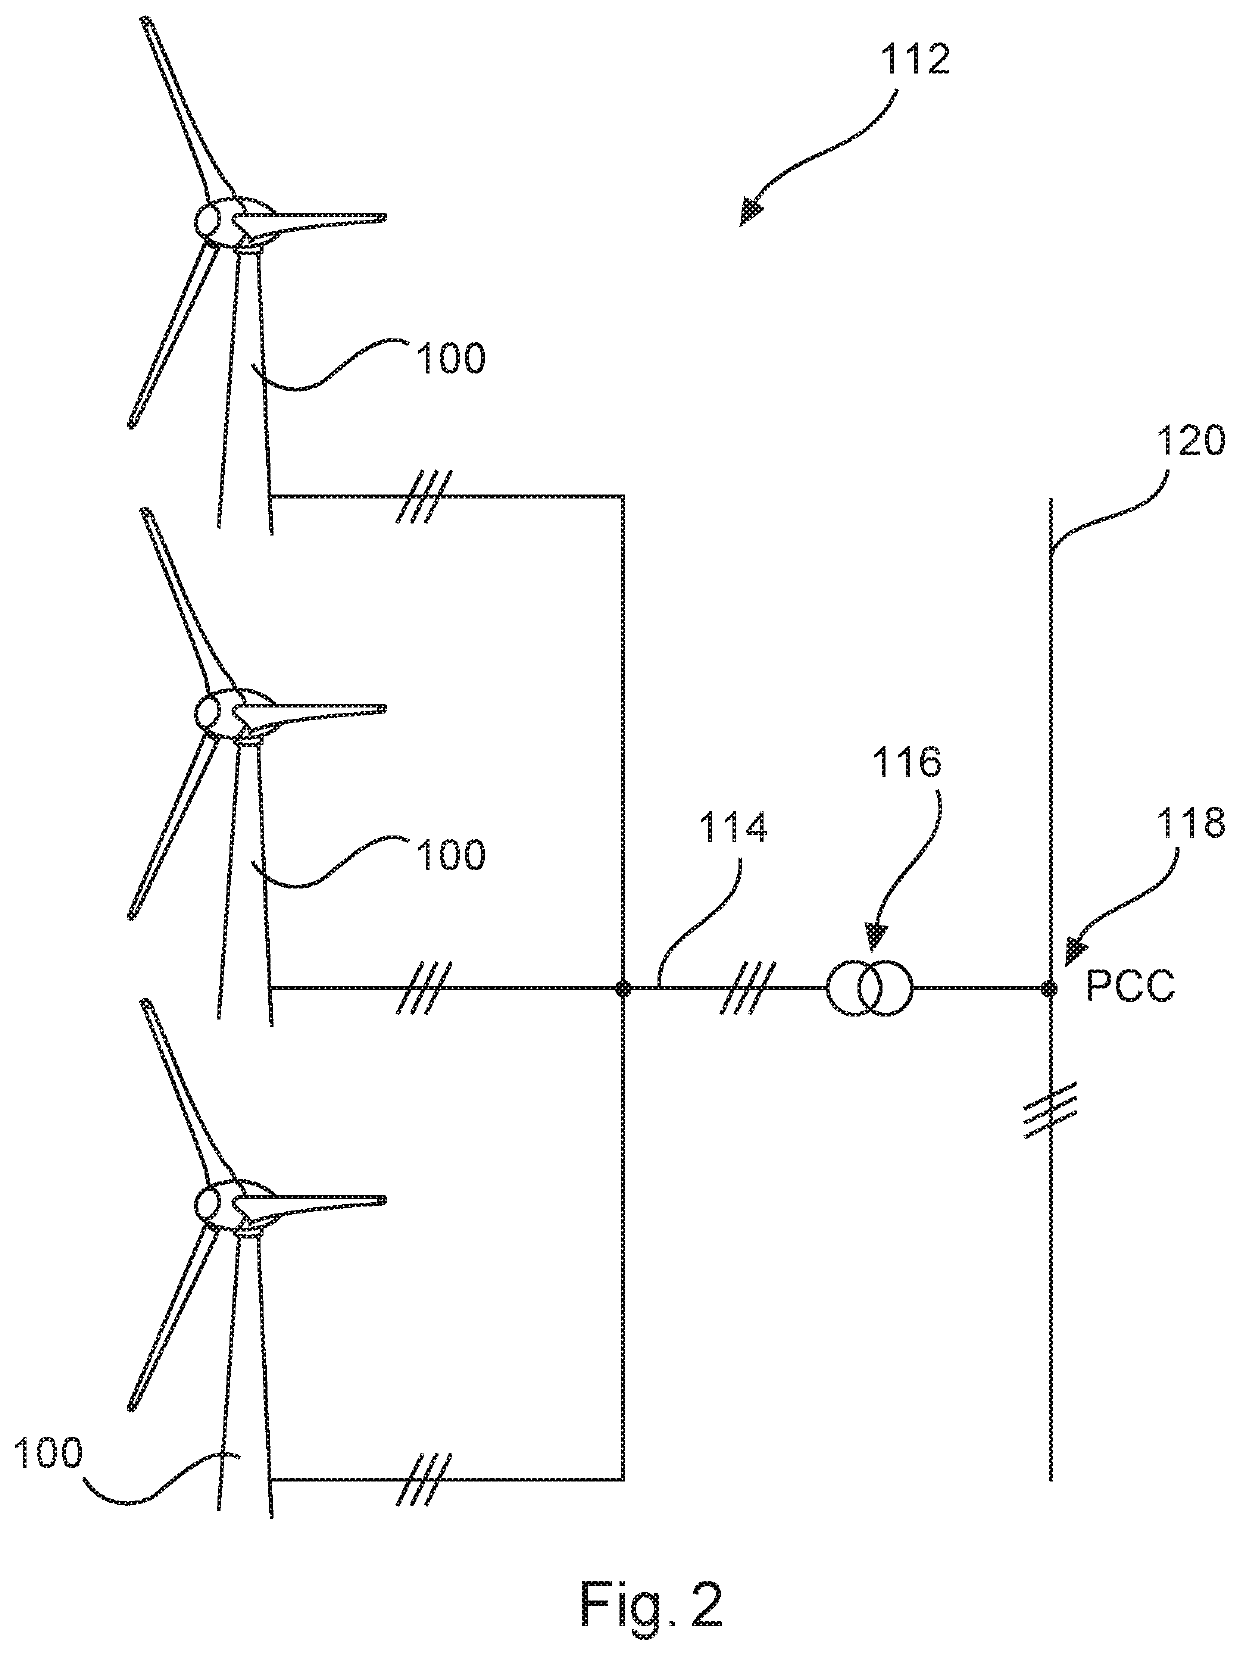 Method for supporting an electrical supply grid by means of one or more wind turbines